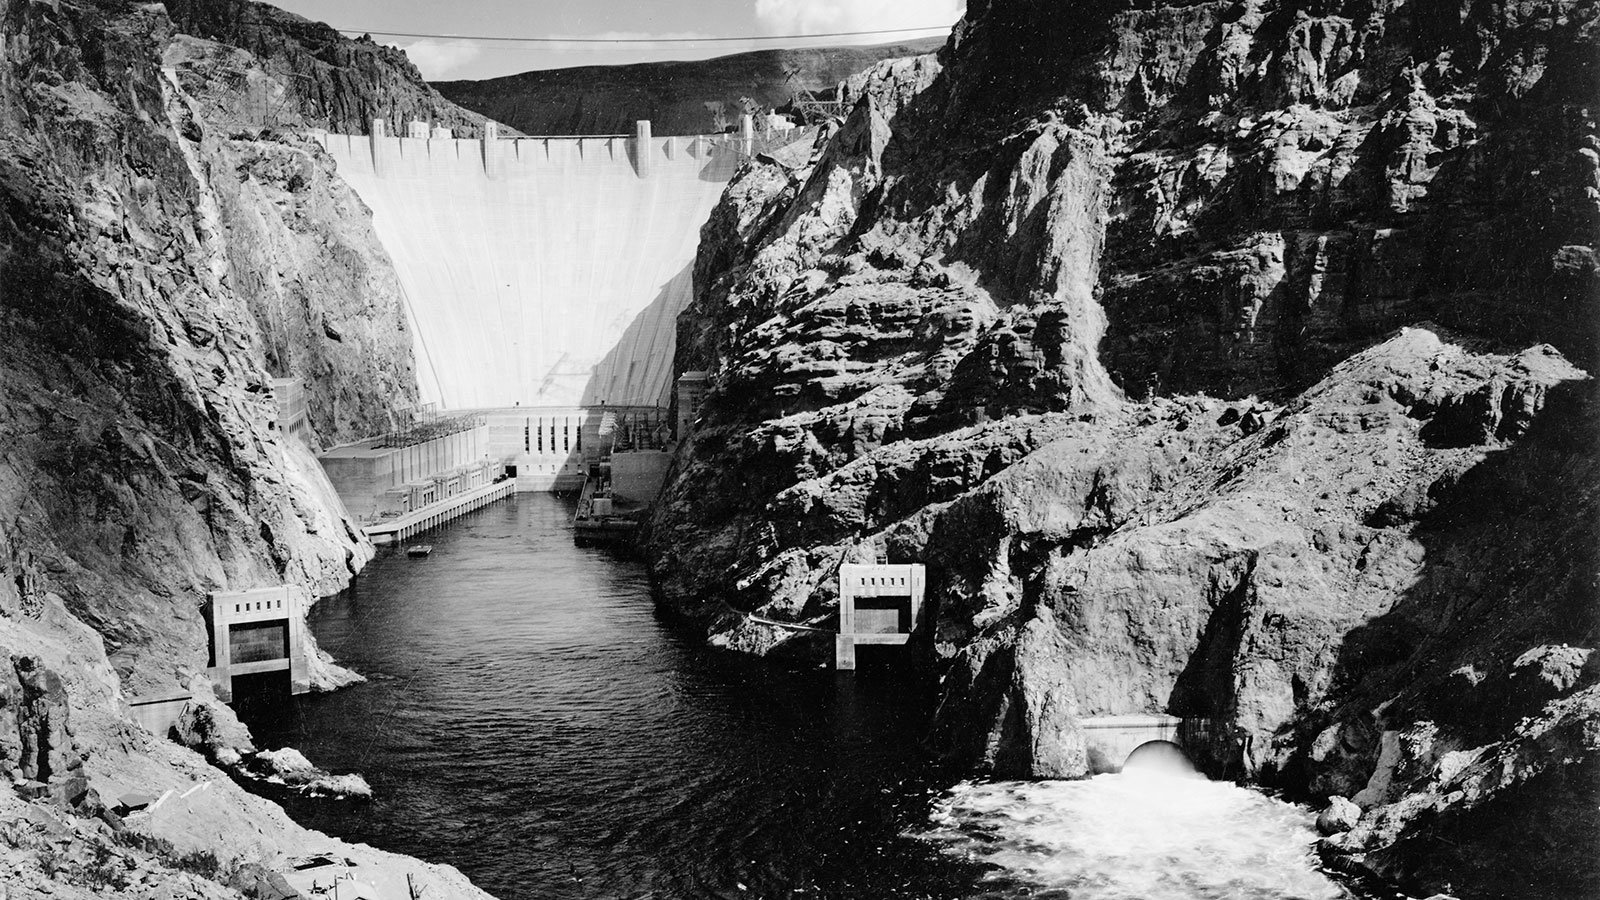 Photograph of the Boulder Dam from Across the Colorado River